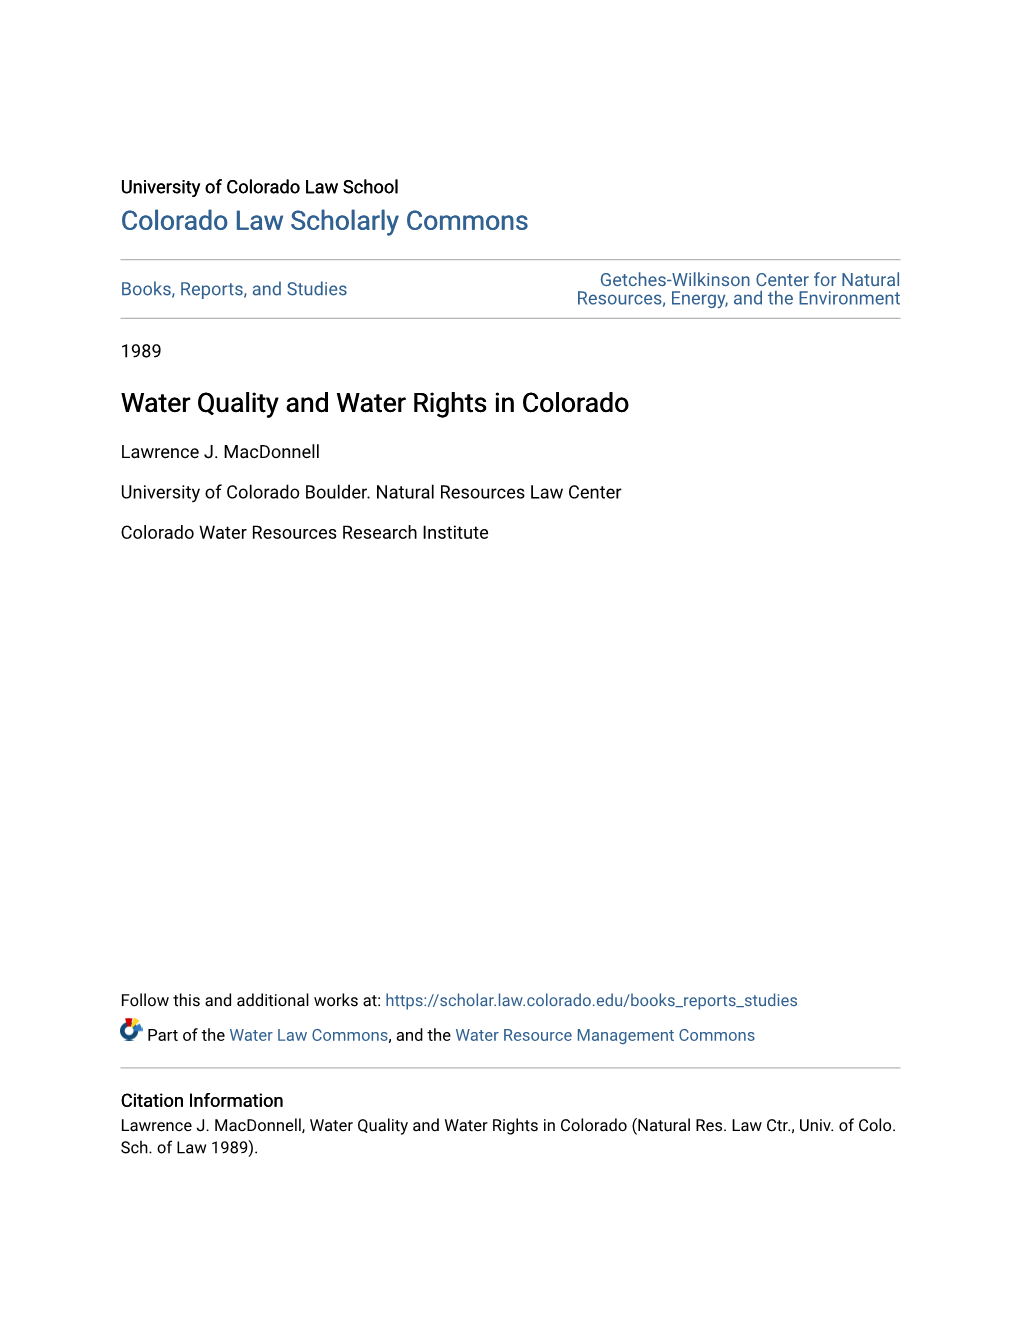 Water Quality and Water Rights in Colorado